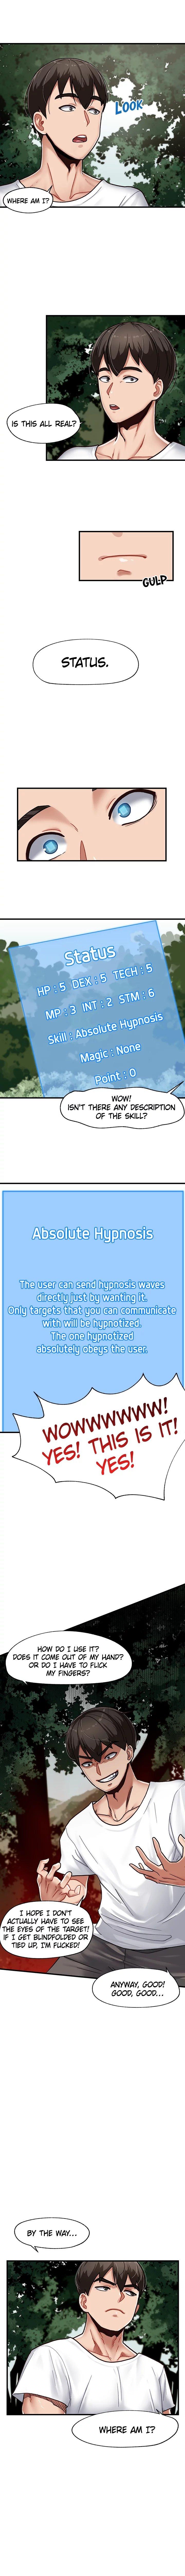 Sem Camisinha Absolute Hypnosis in Another World Body - Page 9